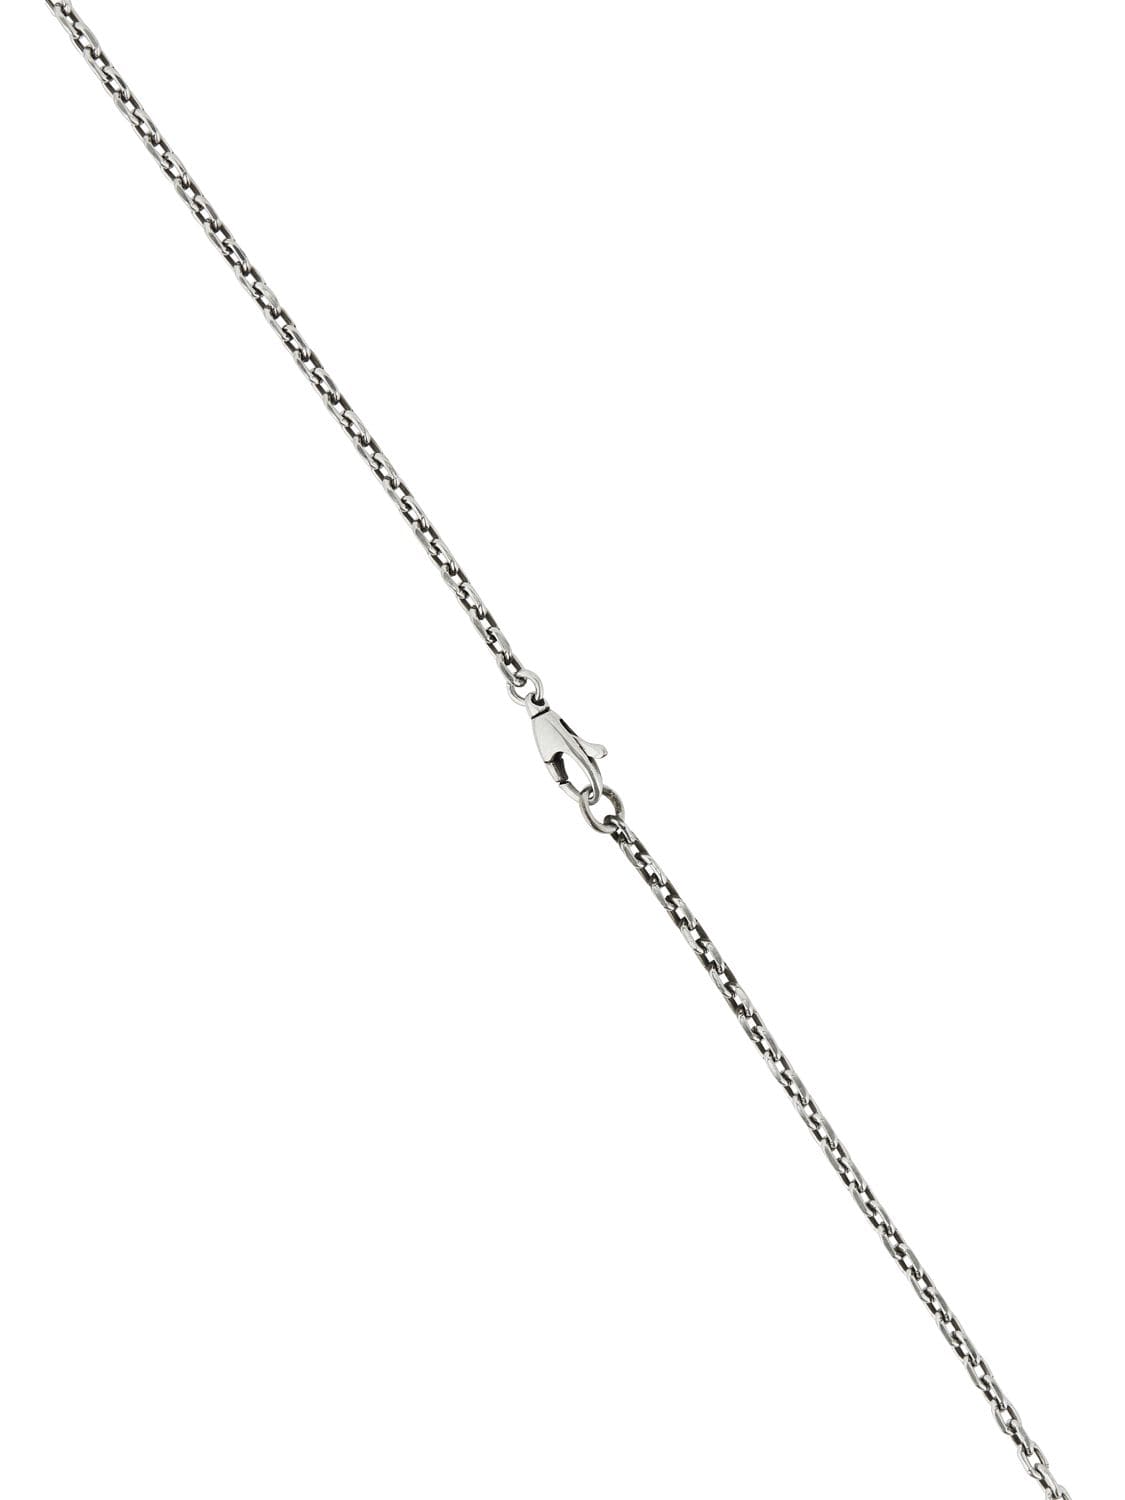 Shop Gucci Heart Enamel Charm Chain Necklace In Silver,red